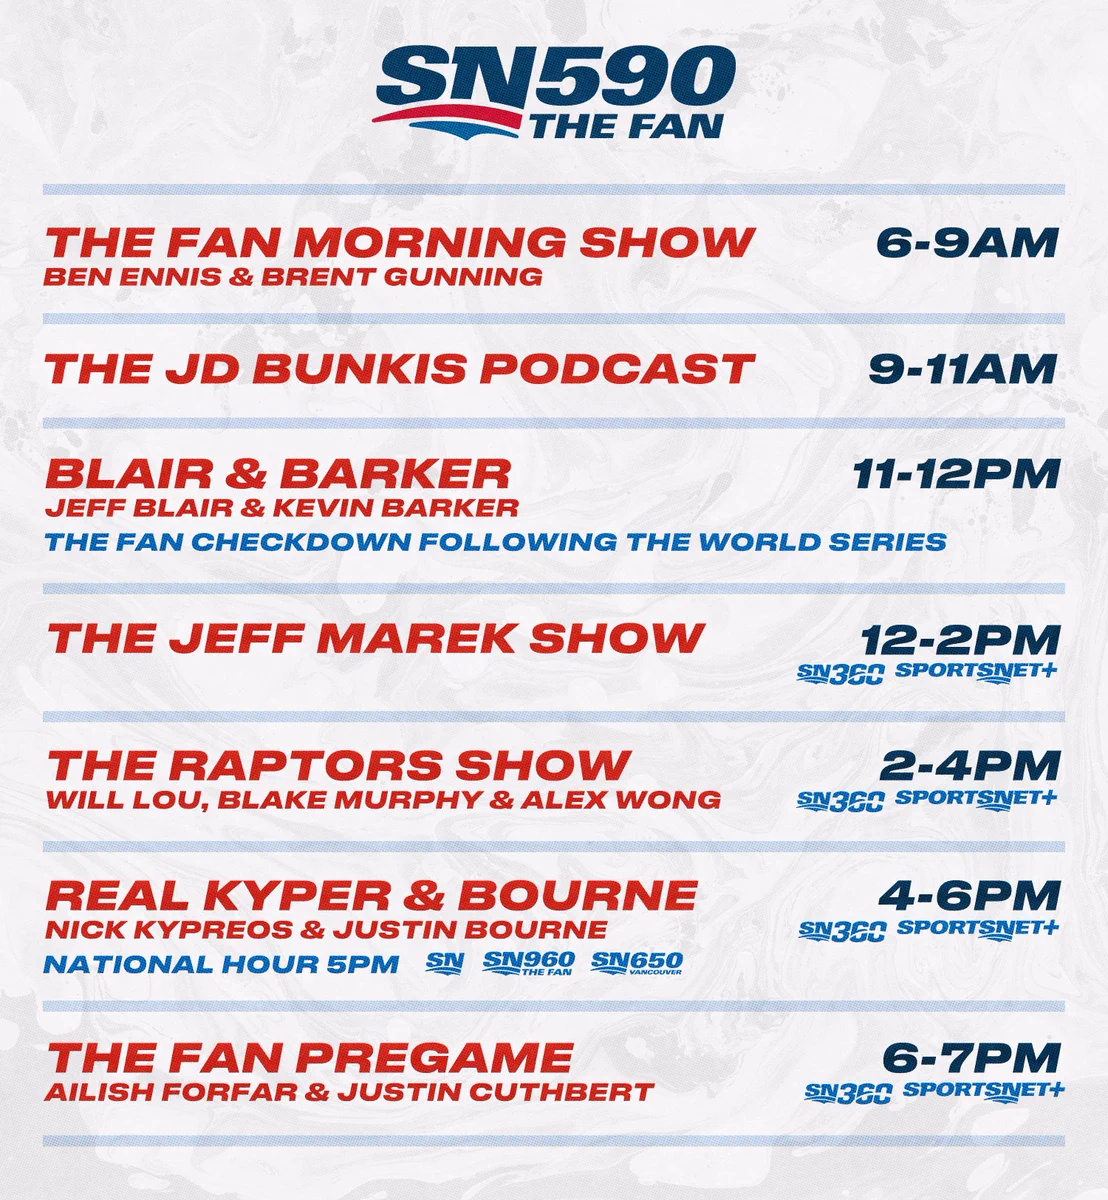 More Fan 590 Lineup Changes